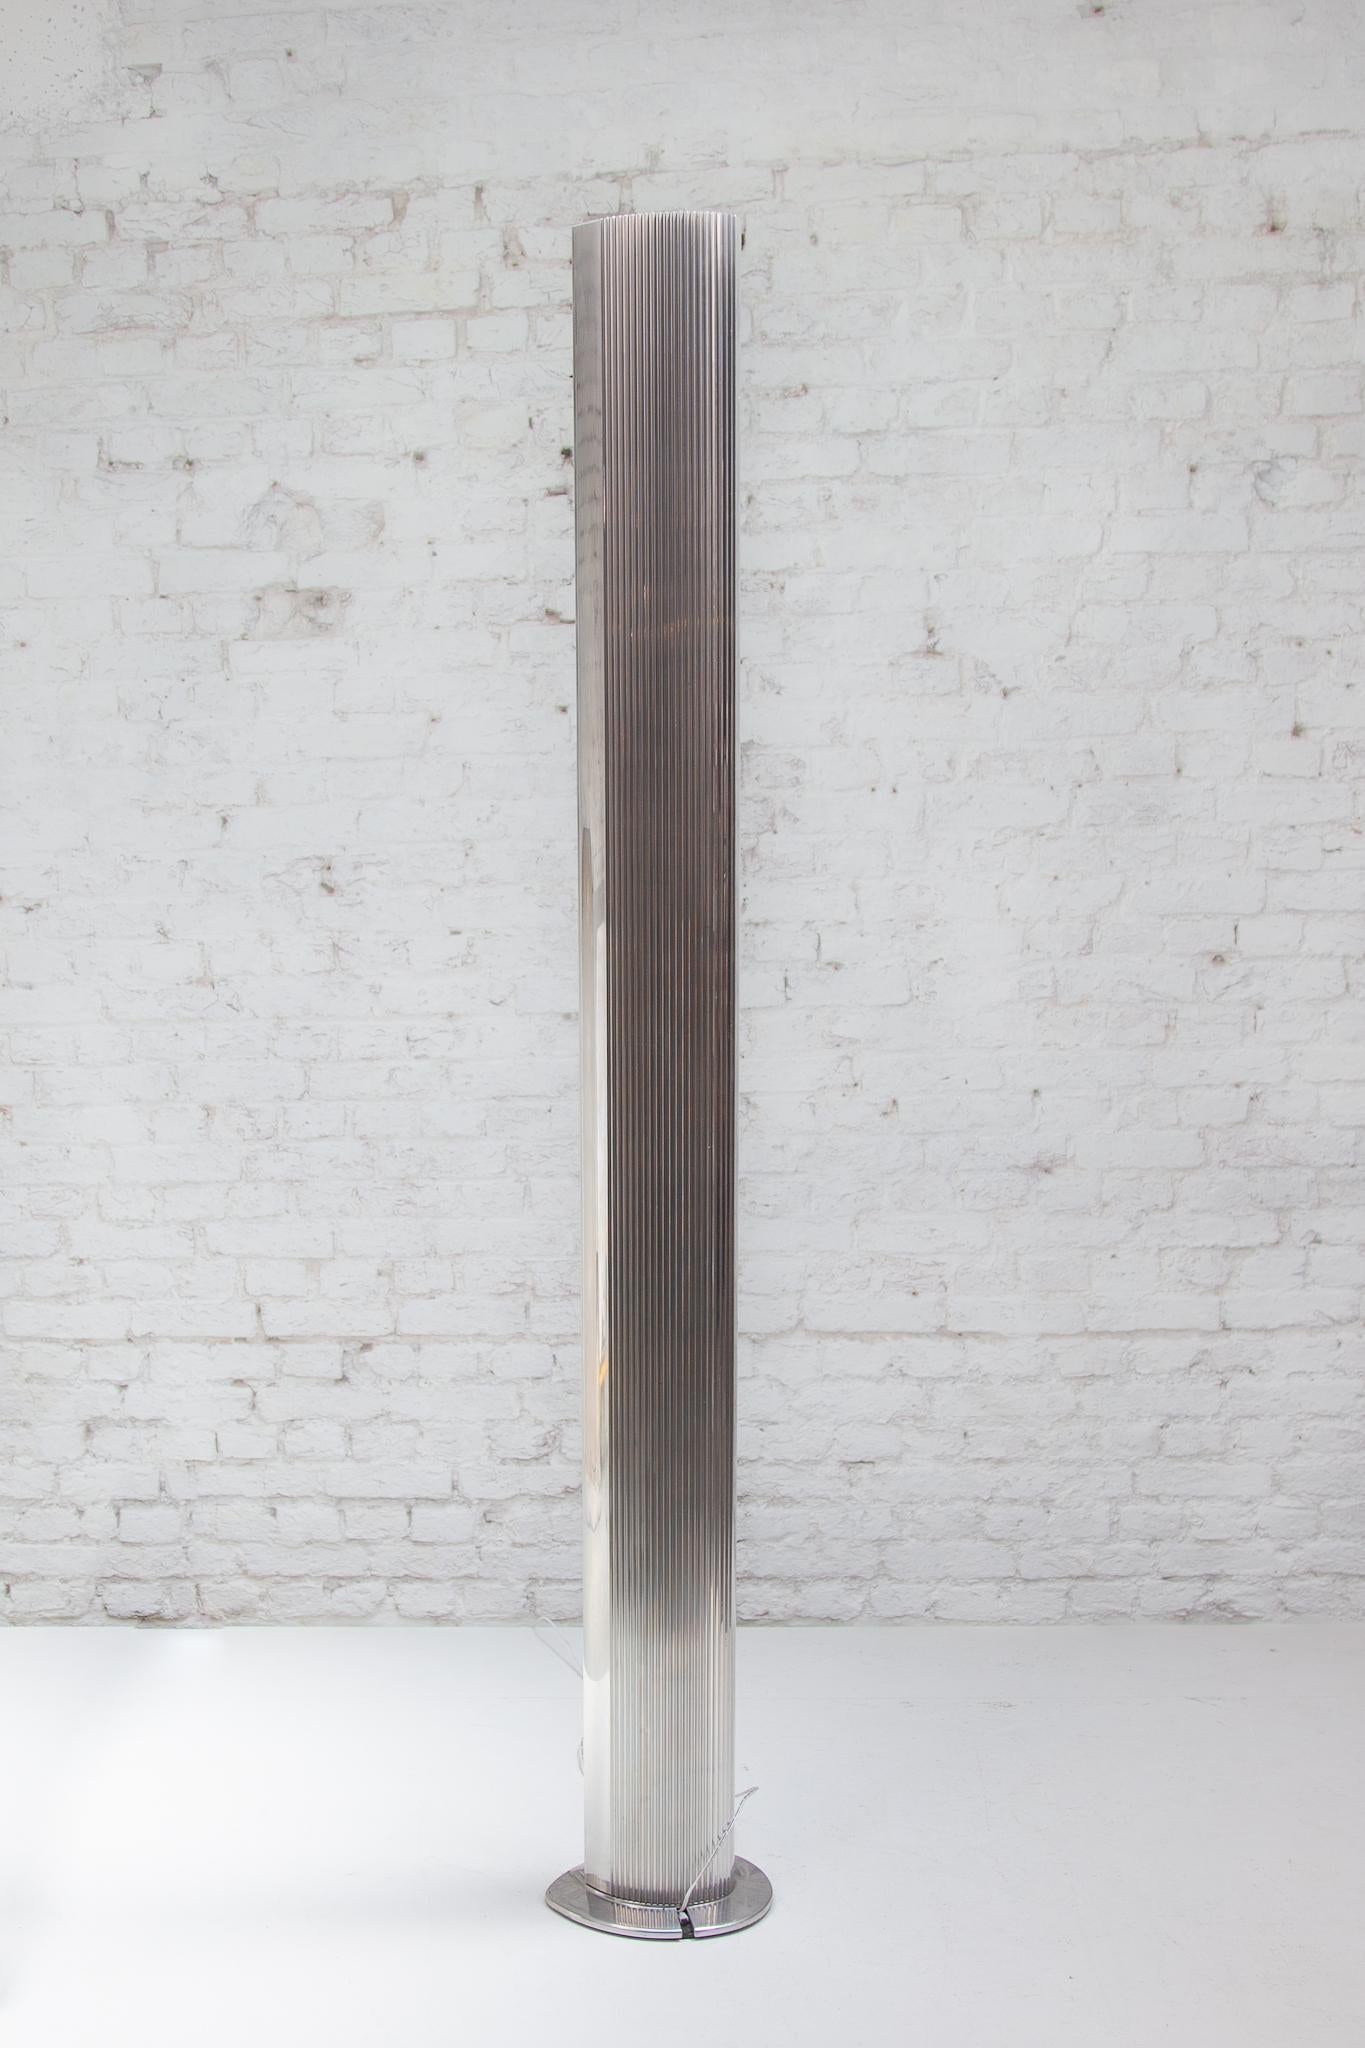 Modern Penombra floor lamp designed by Antoni Flores for Sargot Barcelona, 1980s. This floor lamp is made of cast aluminum and the base is weighed down with metal. This is the long version of 165 cm. The luminosity, color is determined by the type